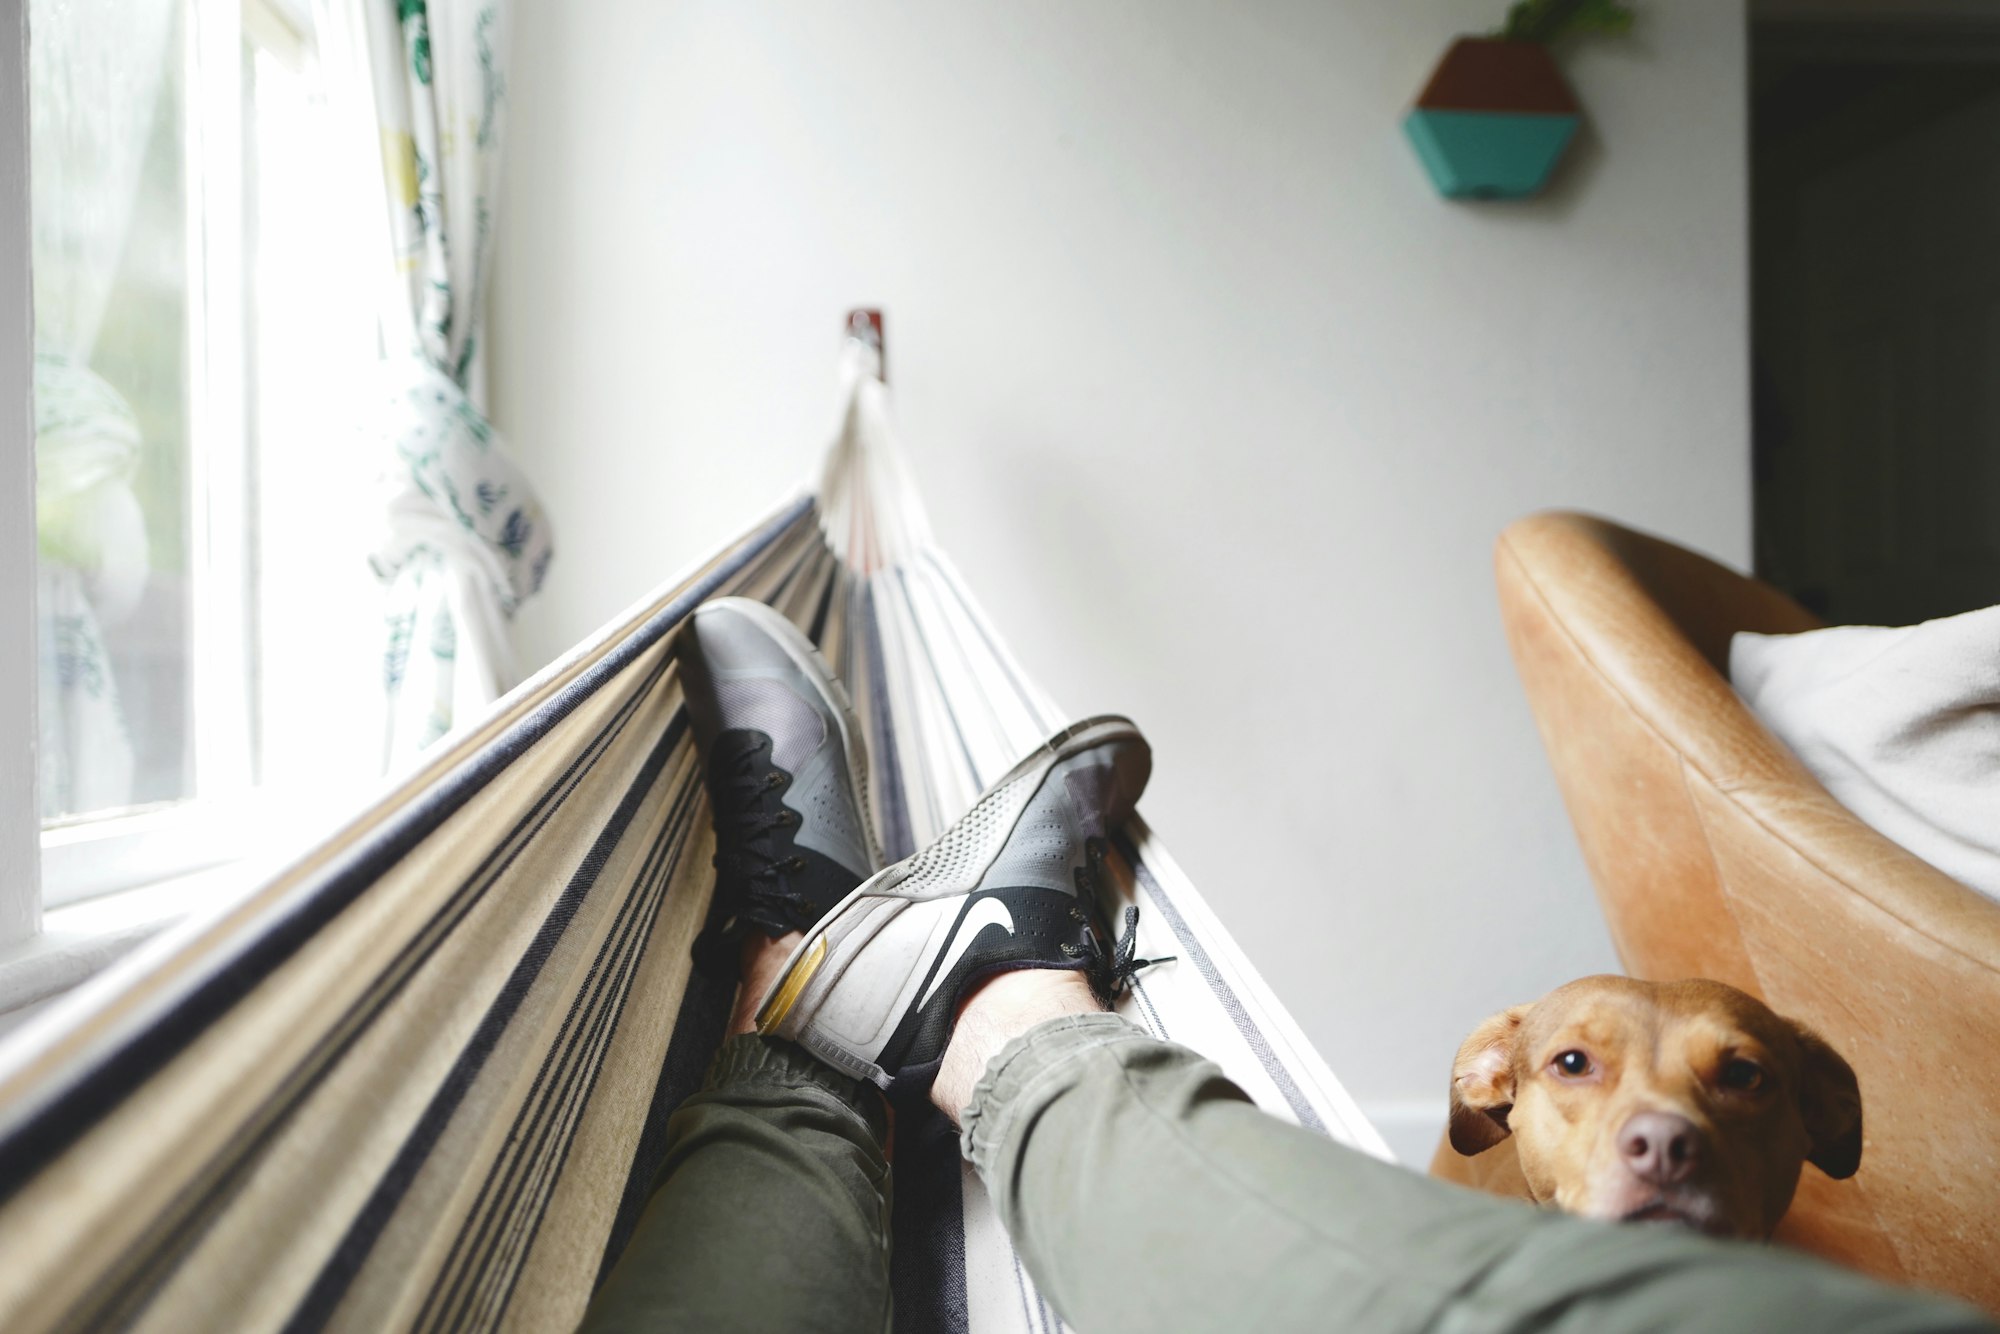 A person on a hammock with their dog looking at them